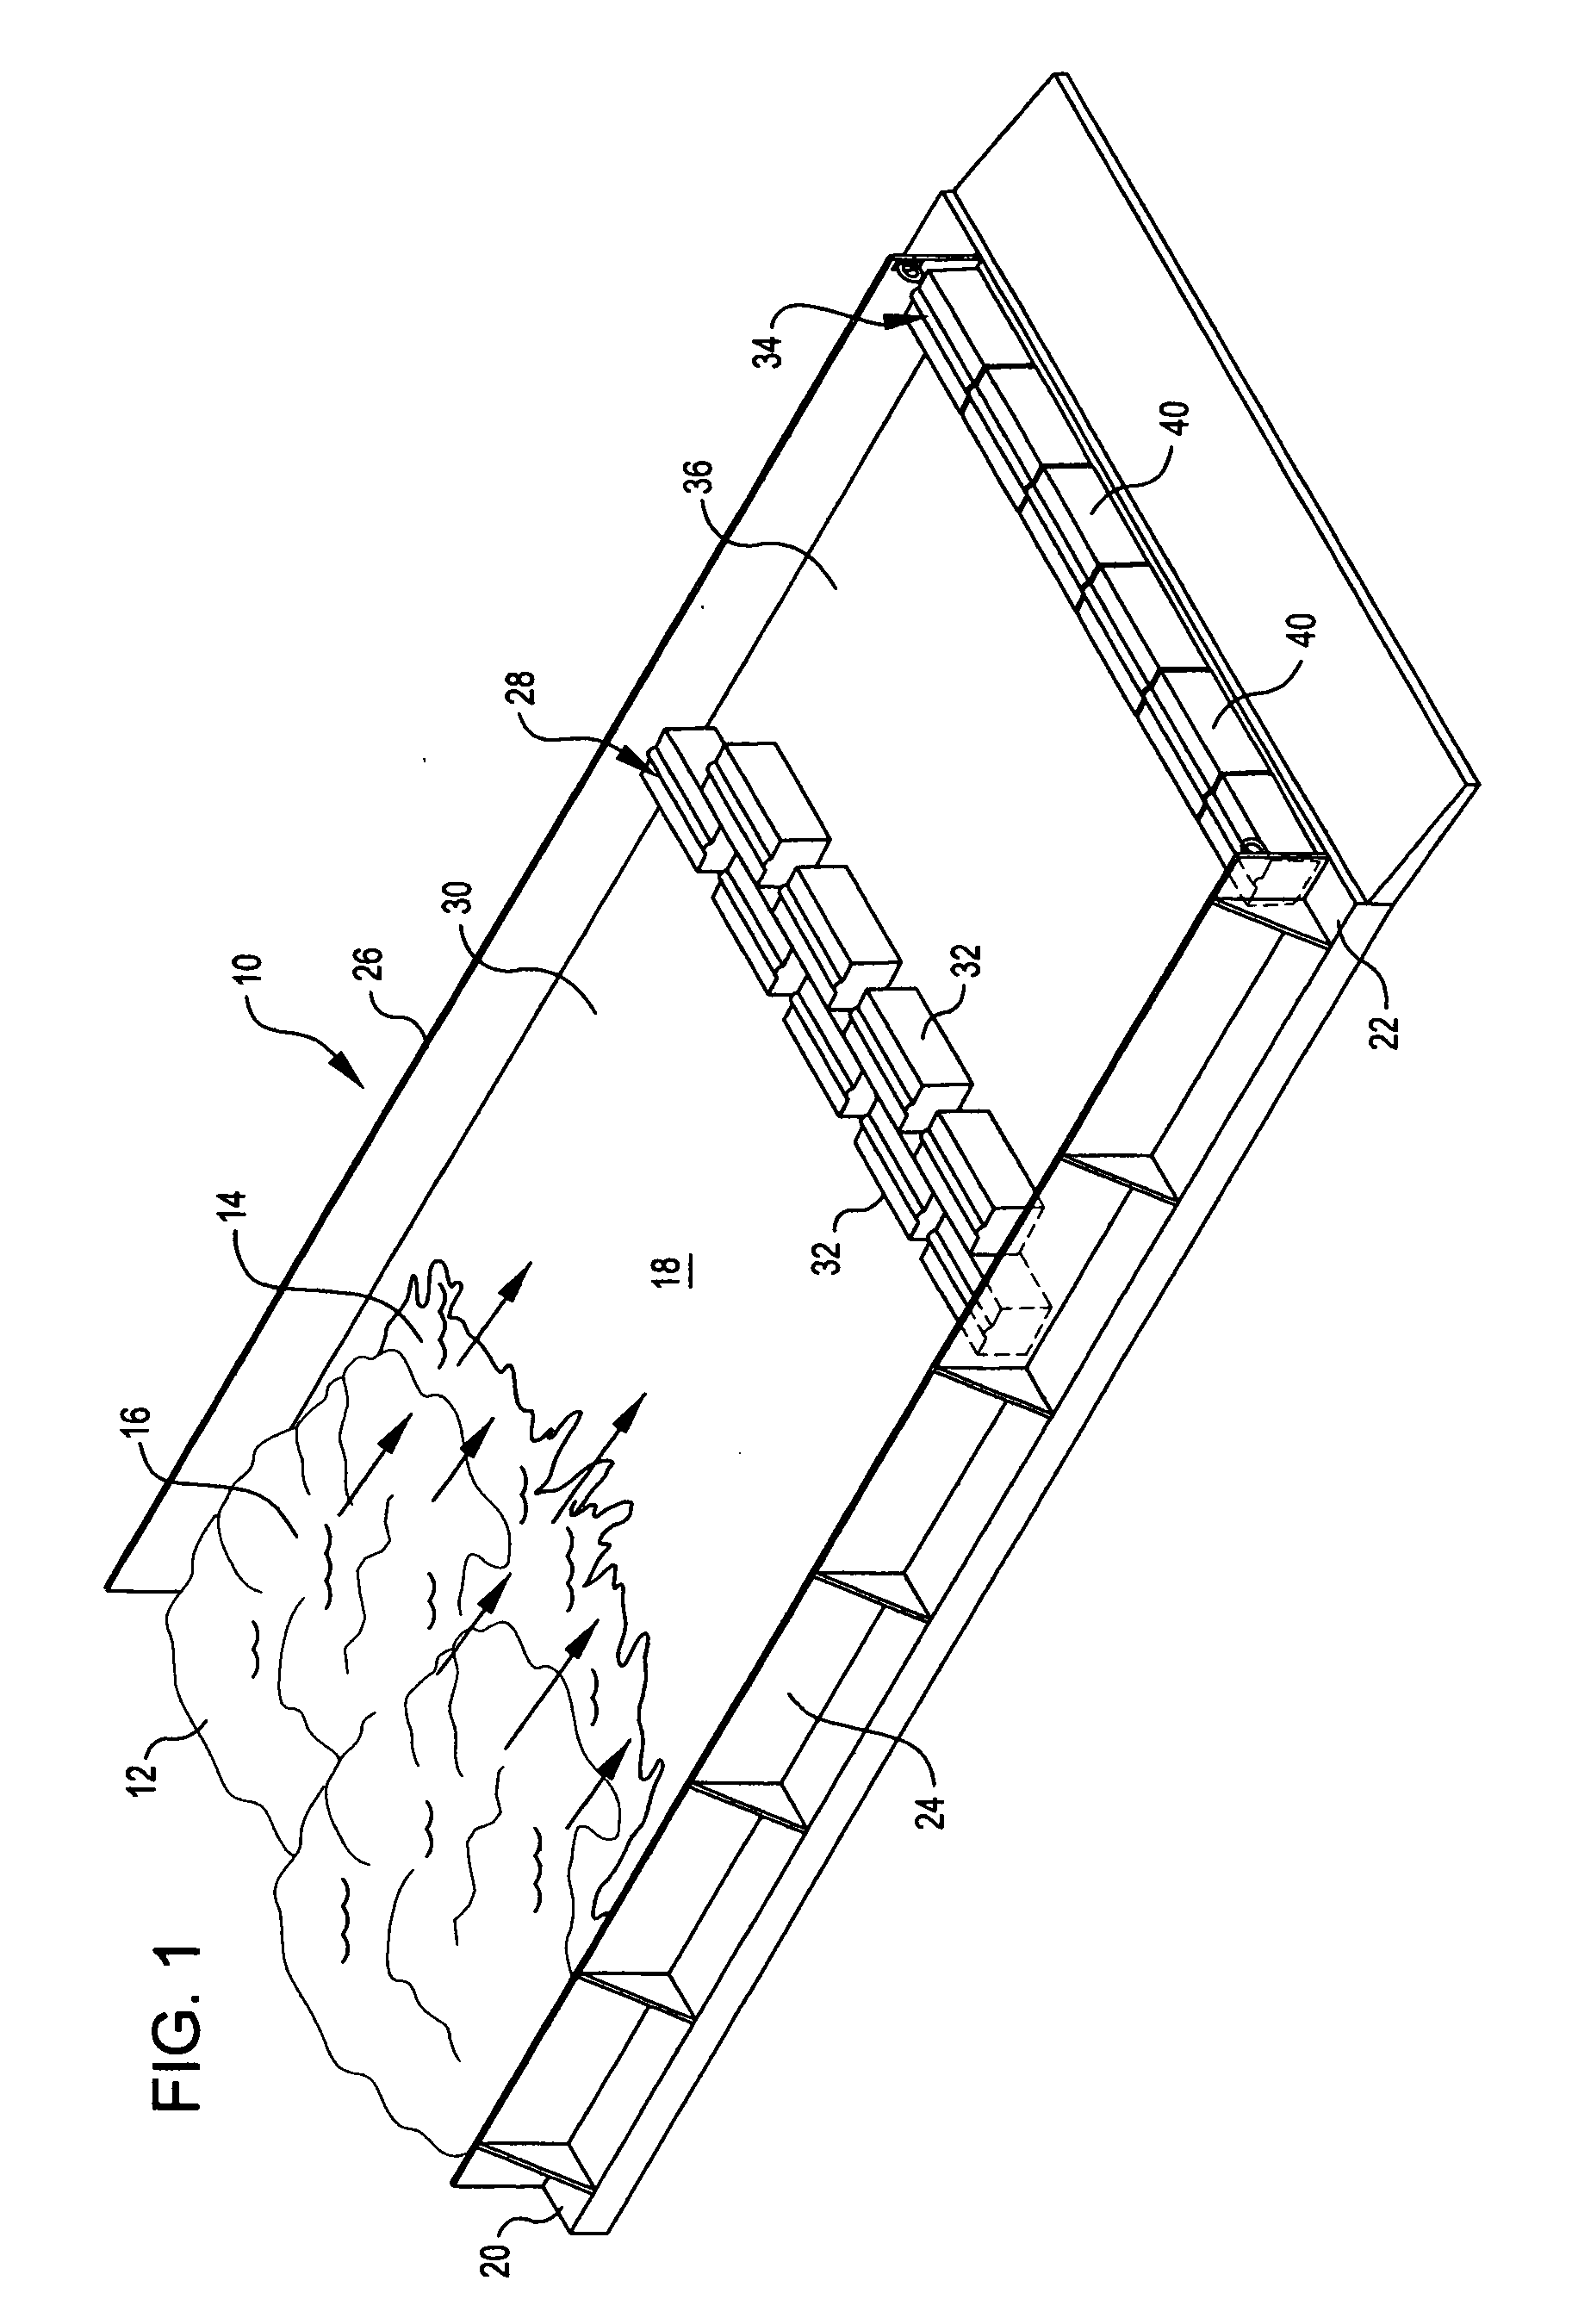 System and method of dewatering dredge spoils using sloping drain barge